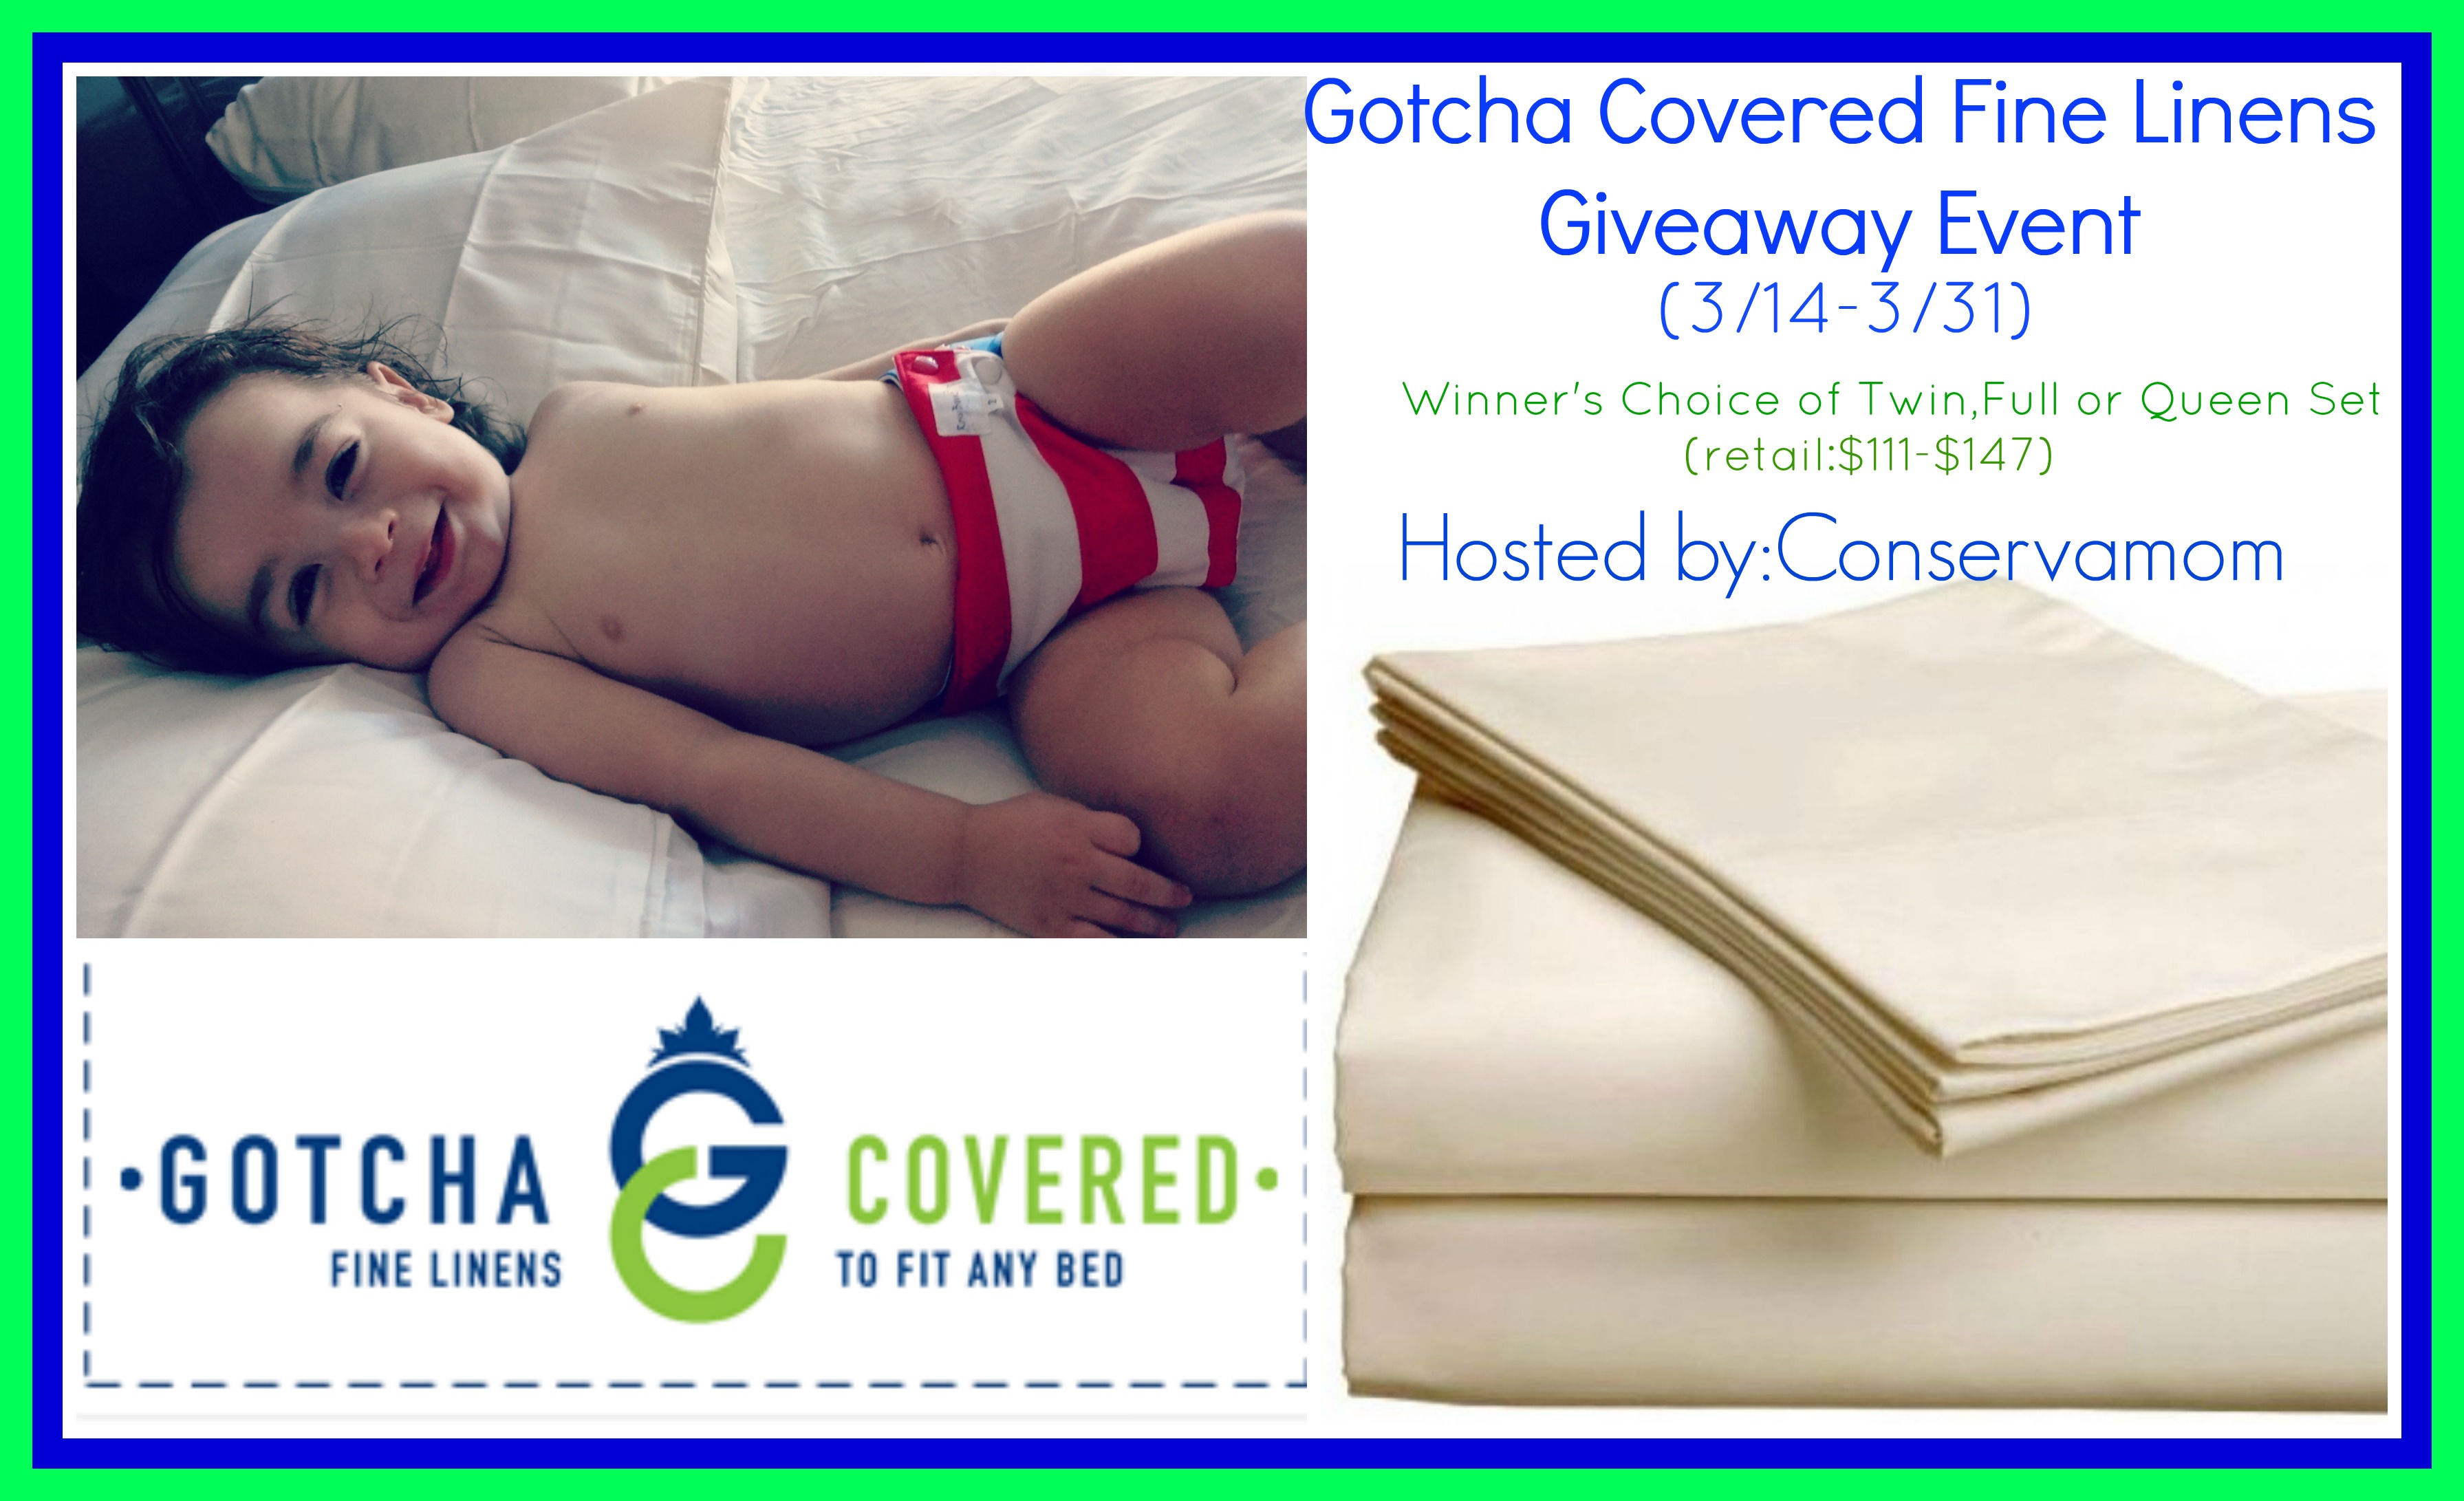 Gotcha Covered Giveaway Linens Event